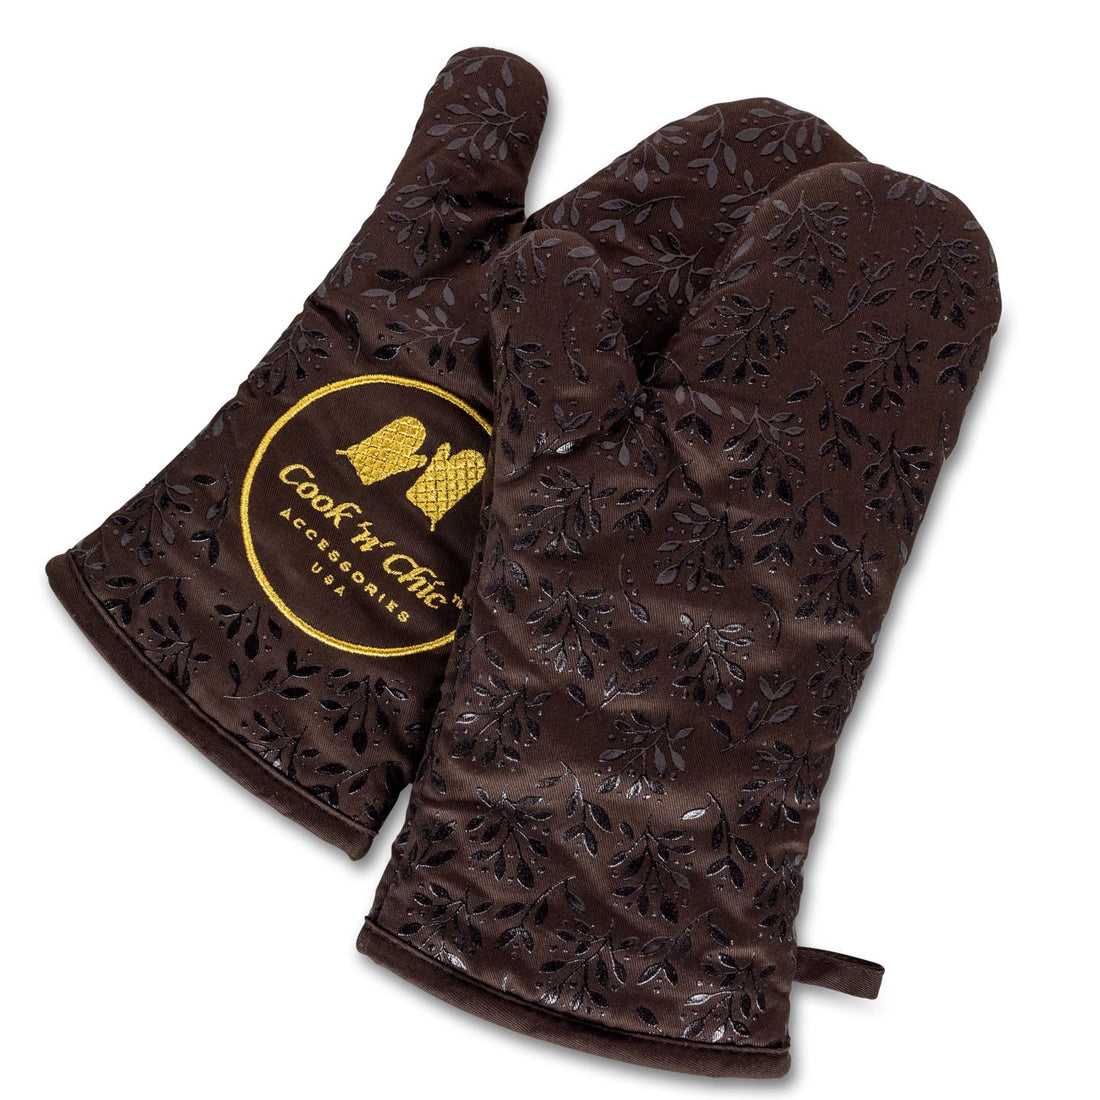 10 Best Oven Mitts in 2022 - Top Oven Gloves and Pot Holders